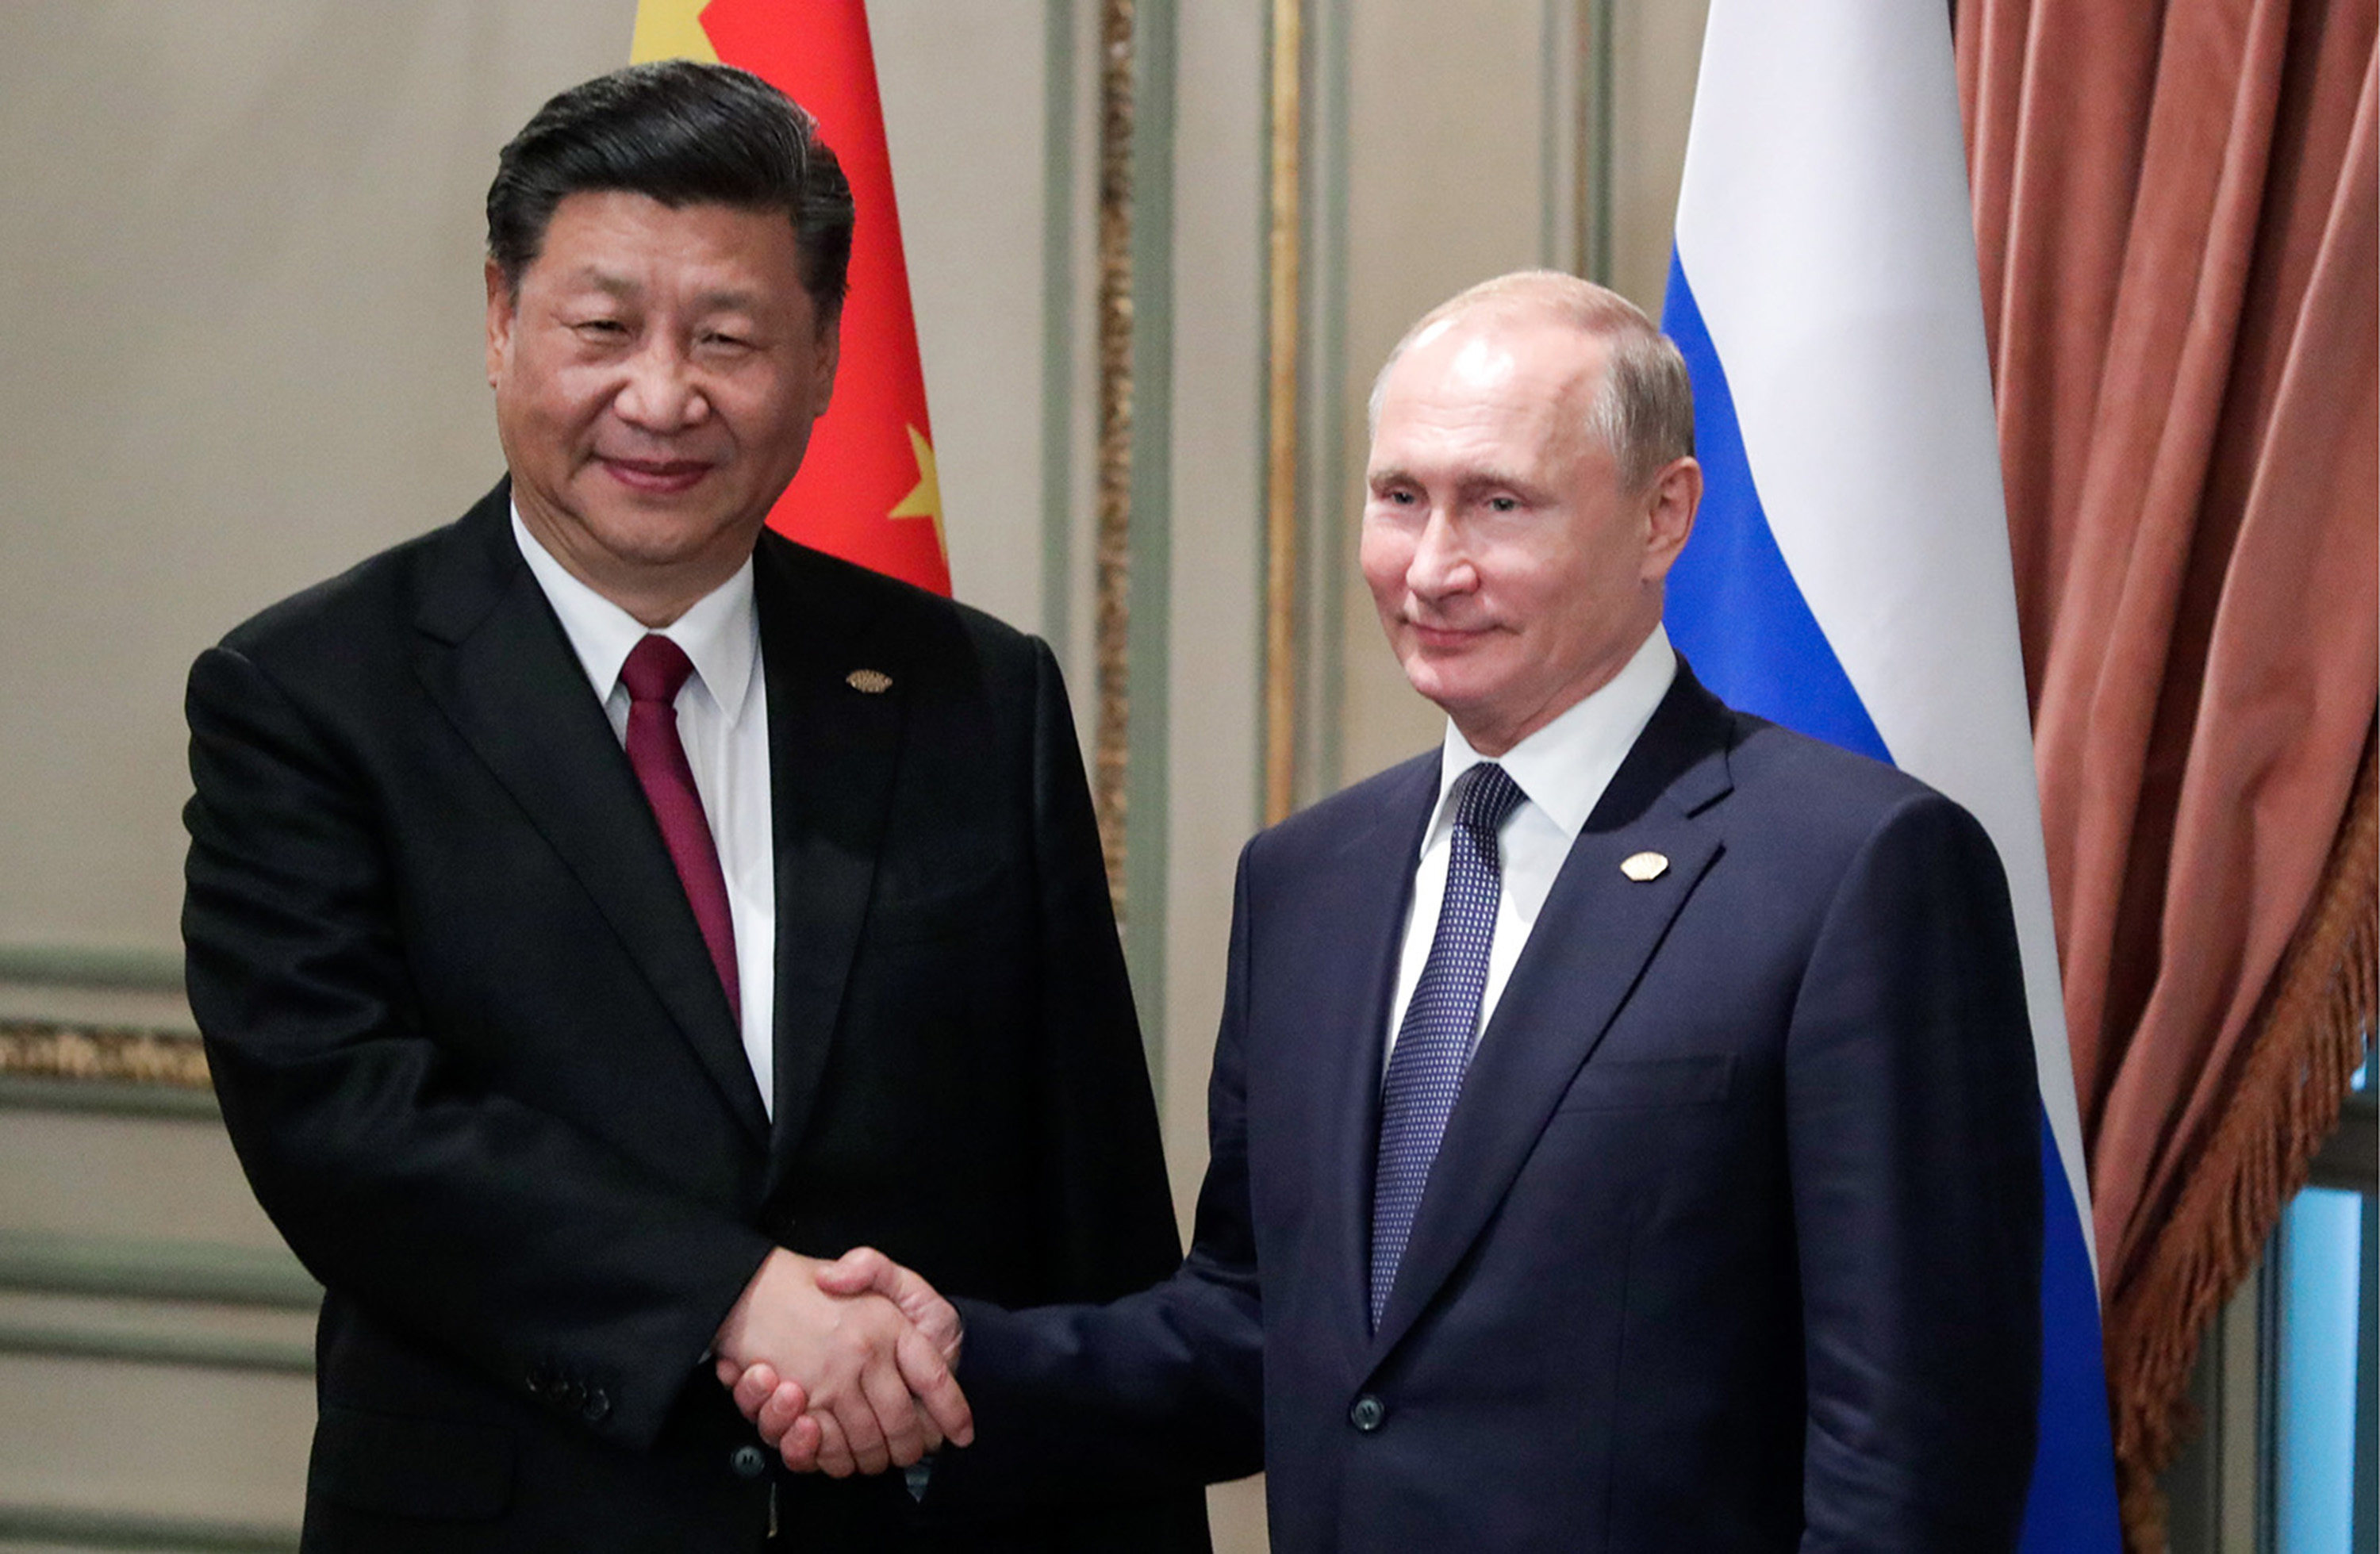 During a phone call last month, Russian President Vladimir Putin, right, told China’s President Xi Jinping, left, he would attend the Beijing Winter Olympics Games opening ceremony on February 4. But China says a report suggesting Xi asked Putin to refrain from invading Ukraine during the Games attempts to undermine the Olympics. Photo: Tass